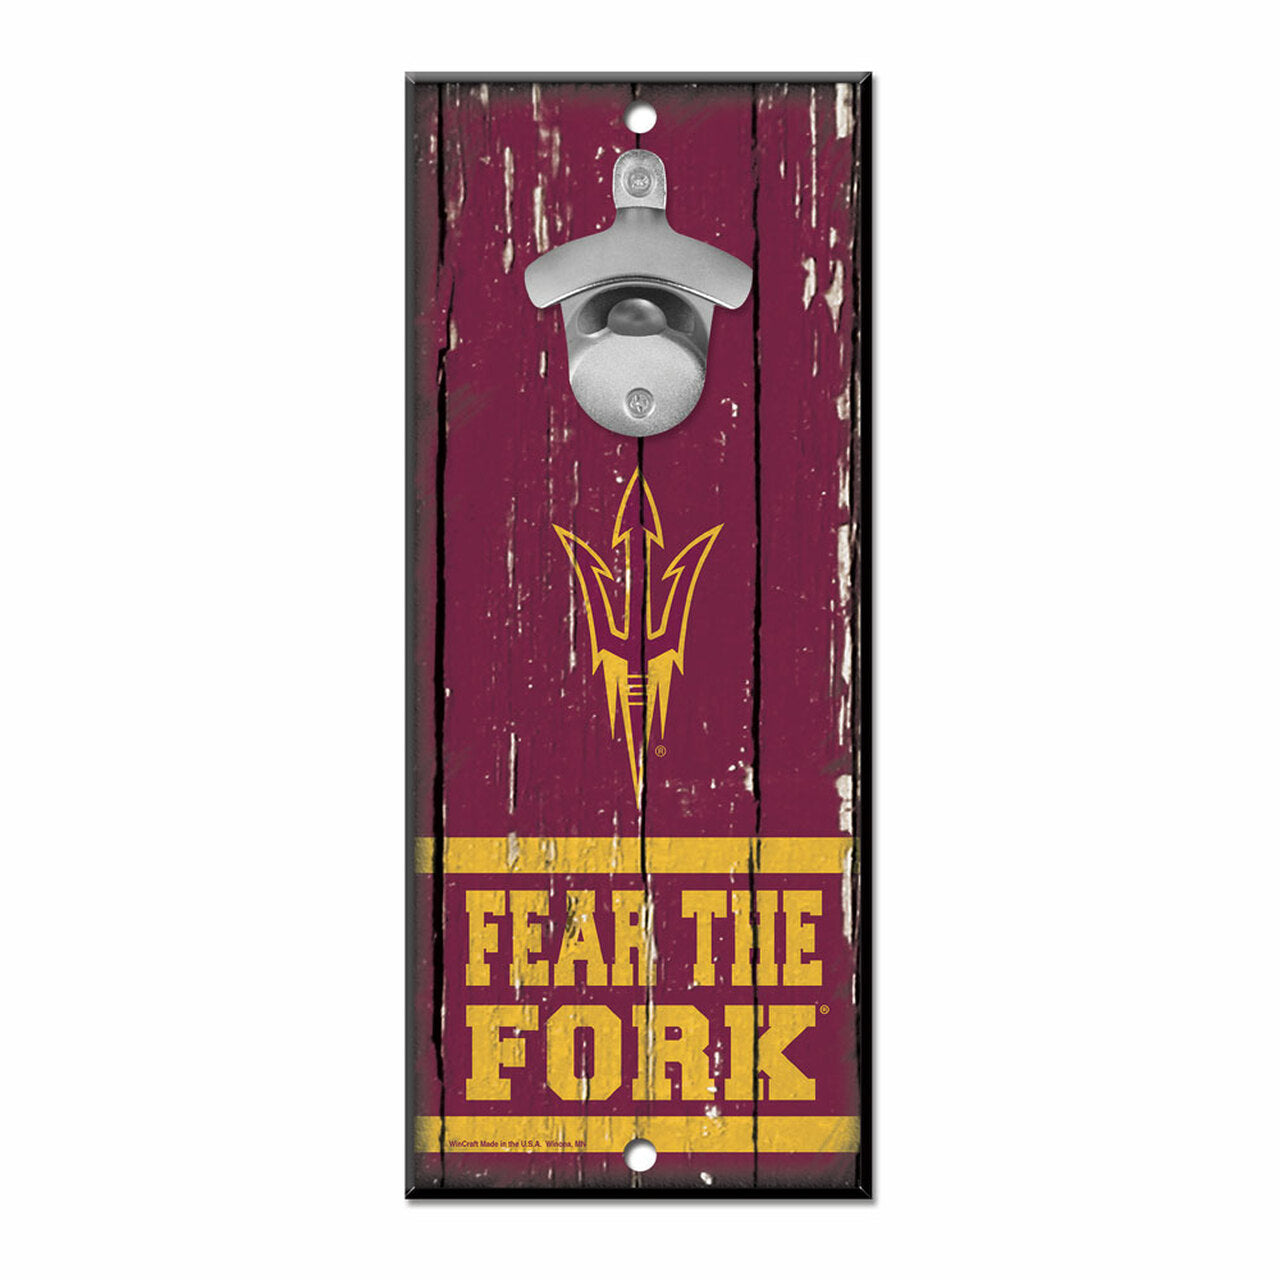 ASU Sun Devils Bottle Opener Wood Sign - 5x11, team graphics, metal opener. Officially licensed, USA-made by Wincraft.